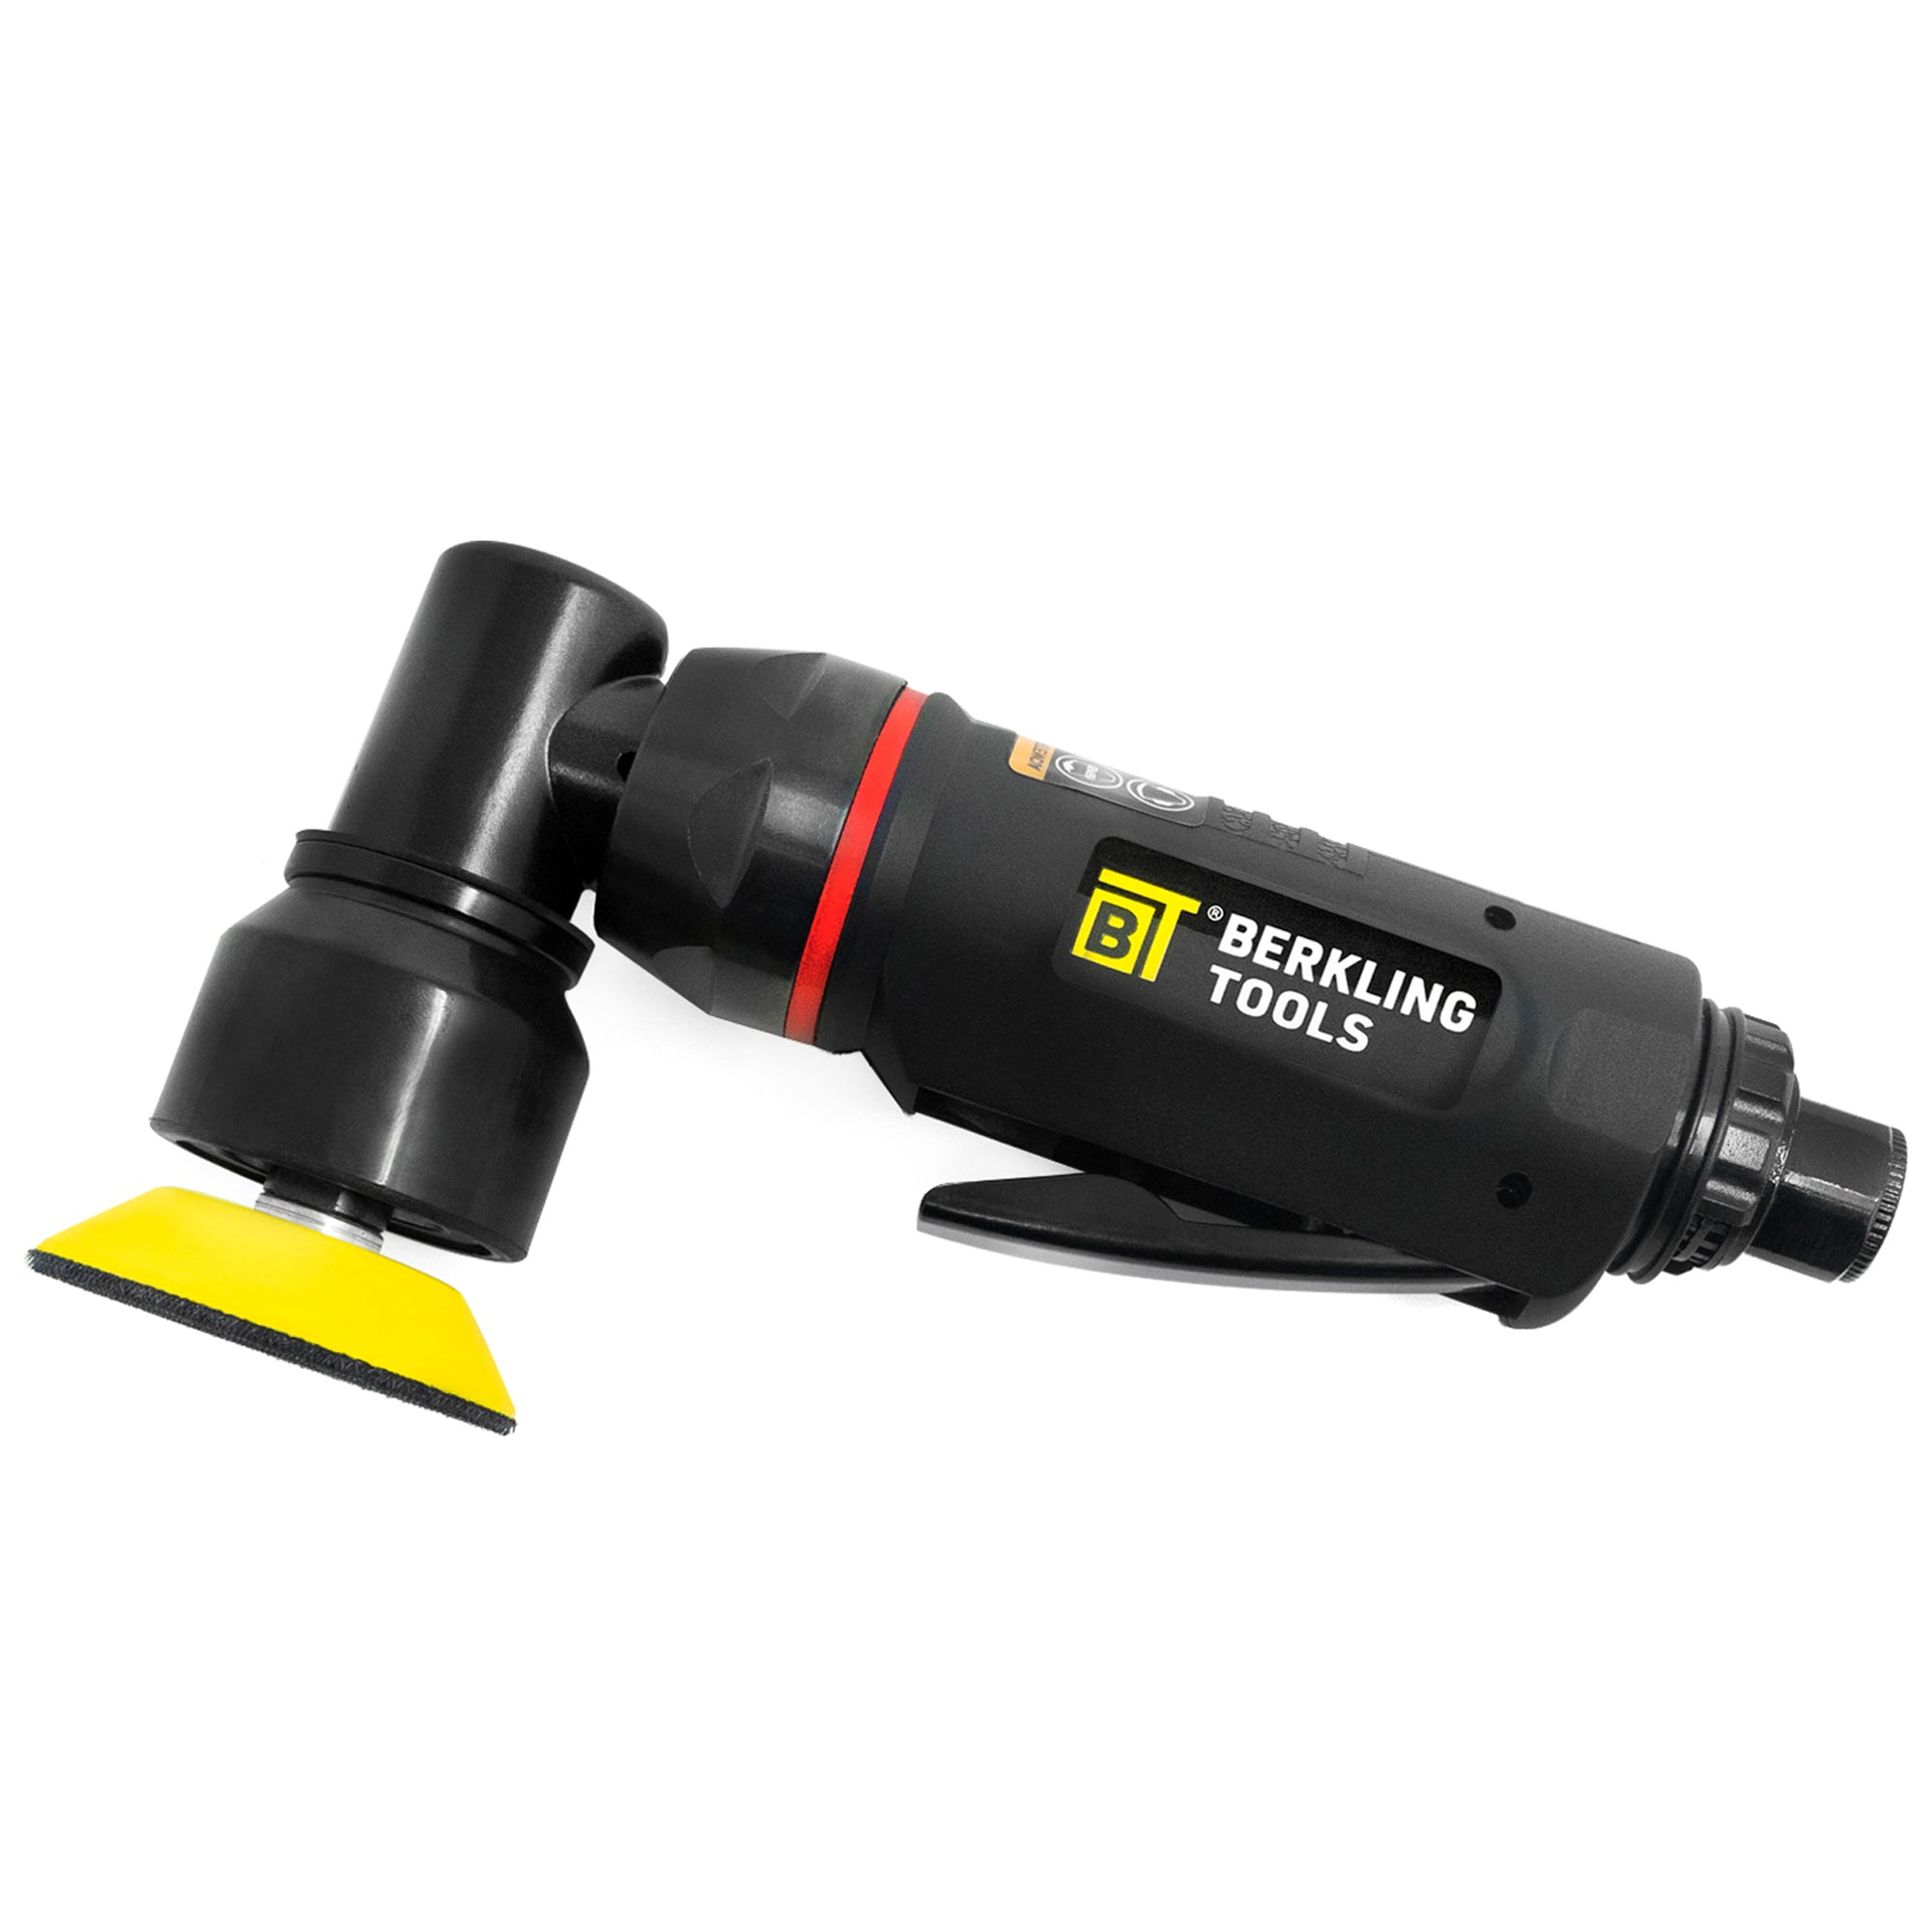 Teng Tools 25,000 RPM Mini Angled Pneumatic Composite Air Die